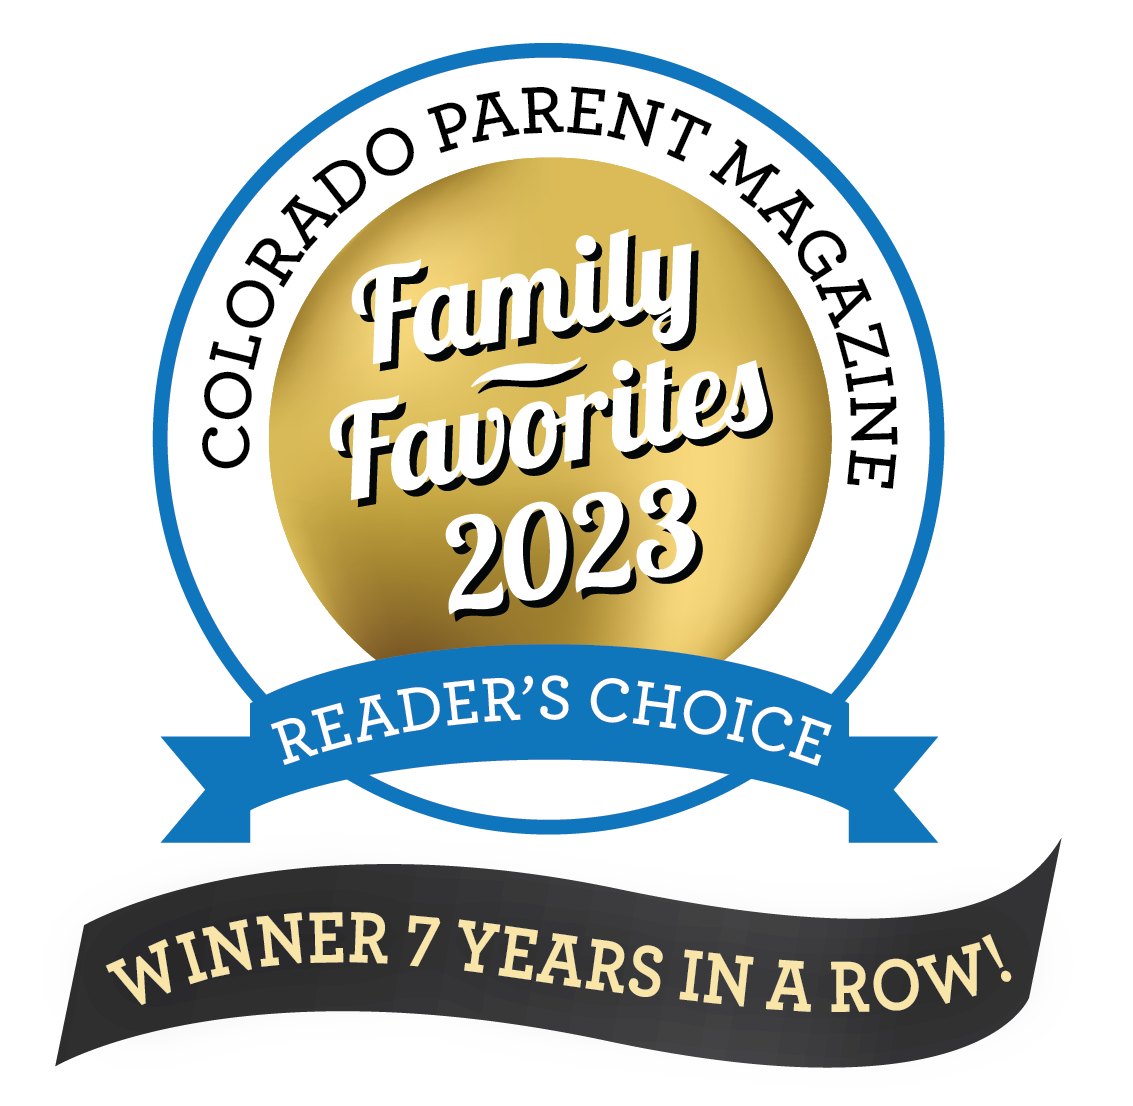 Colorado Parent Magazine Family Favorites 2023 Reader's Choice - Winner 7 years in a row!